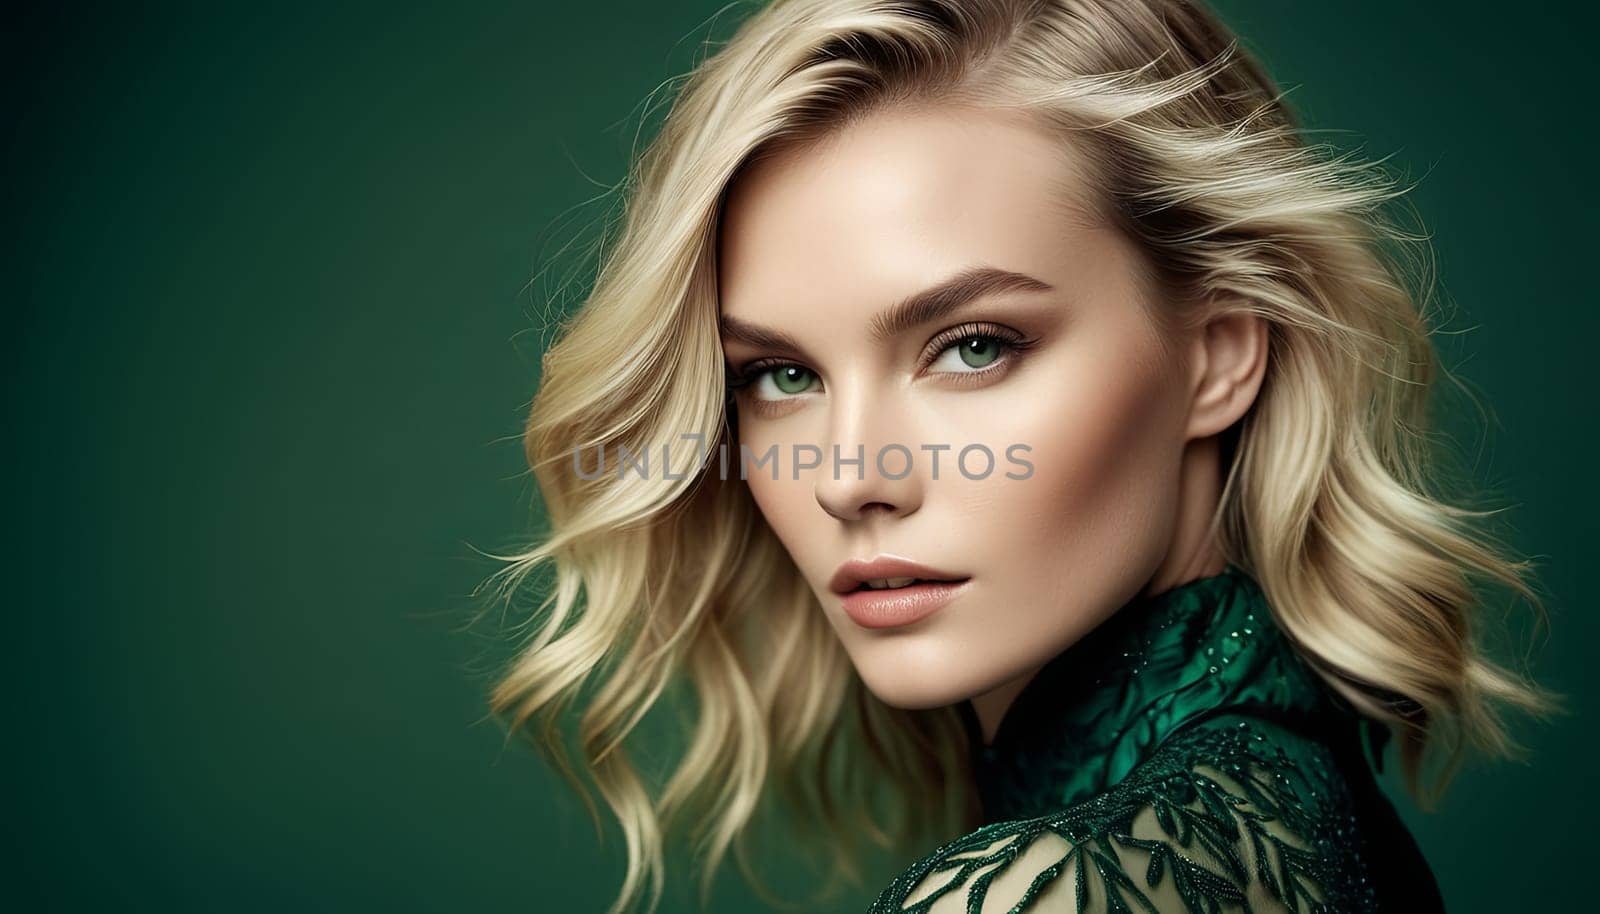 Woman in green outfit, studio setting, neutral expression. Captured to showcase clothing style and design. by Matiunina